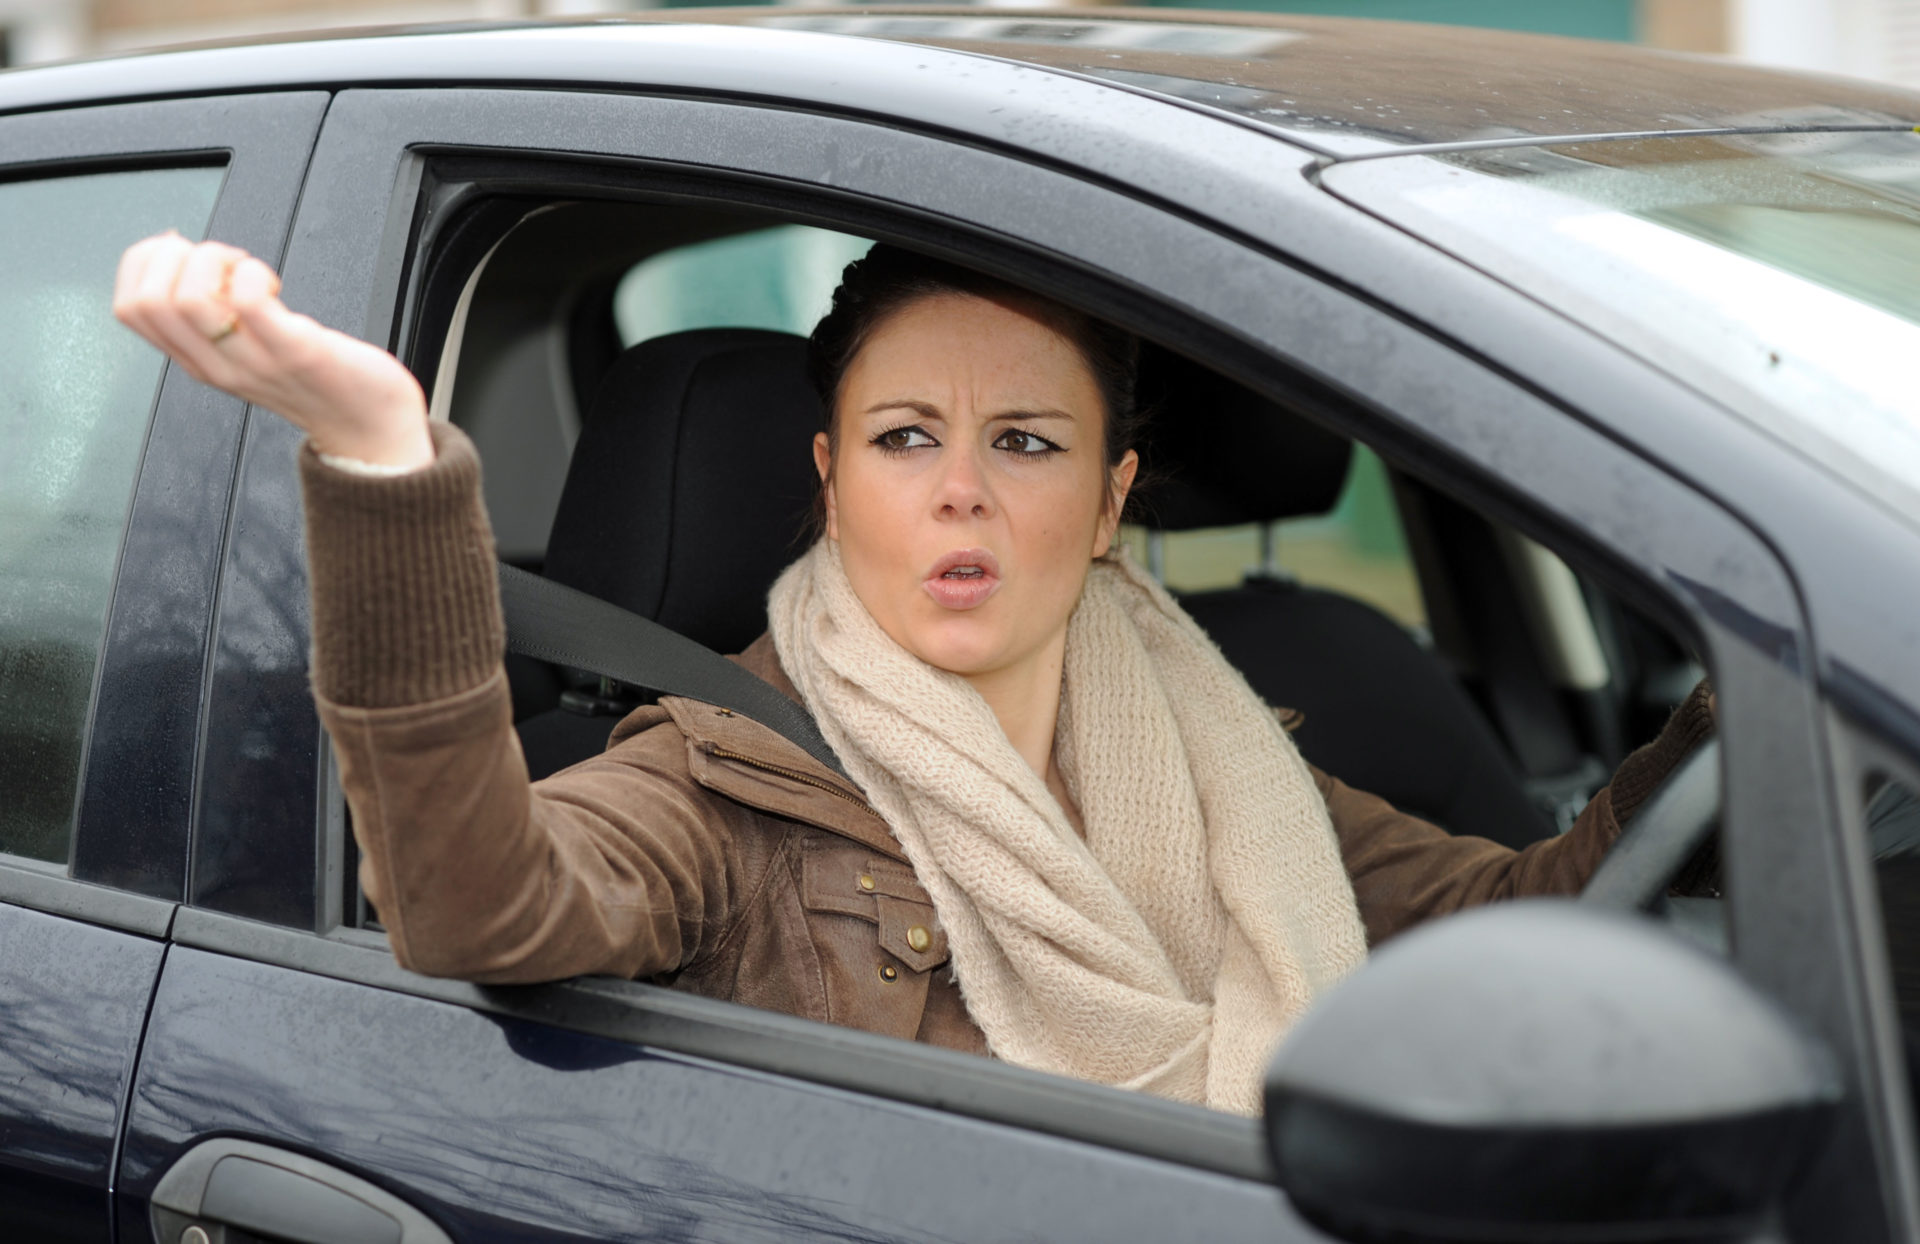 Female in her 20s angry driving a car with road rage shouting at other motorists (Simon Dack / Alamy Stock Photo)